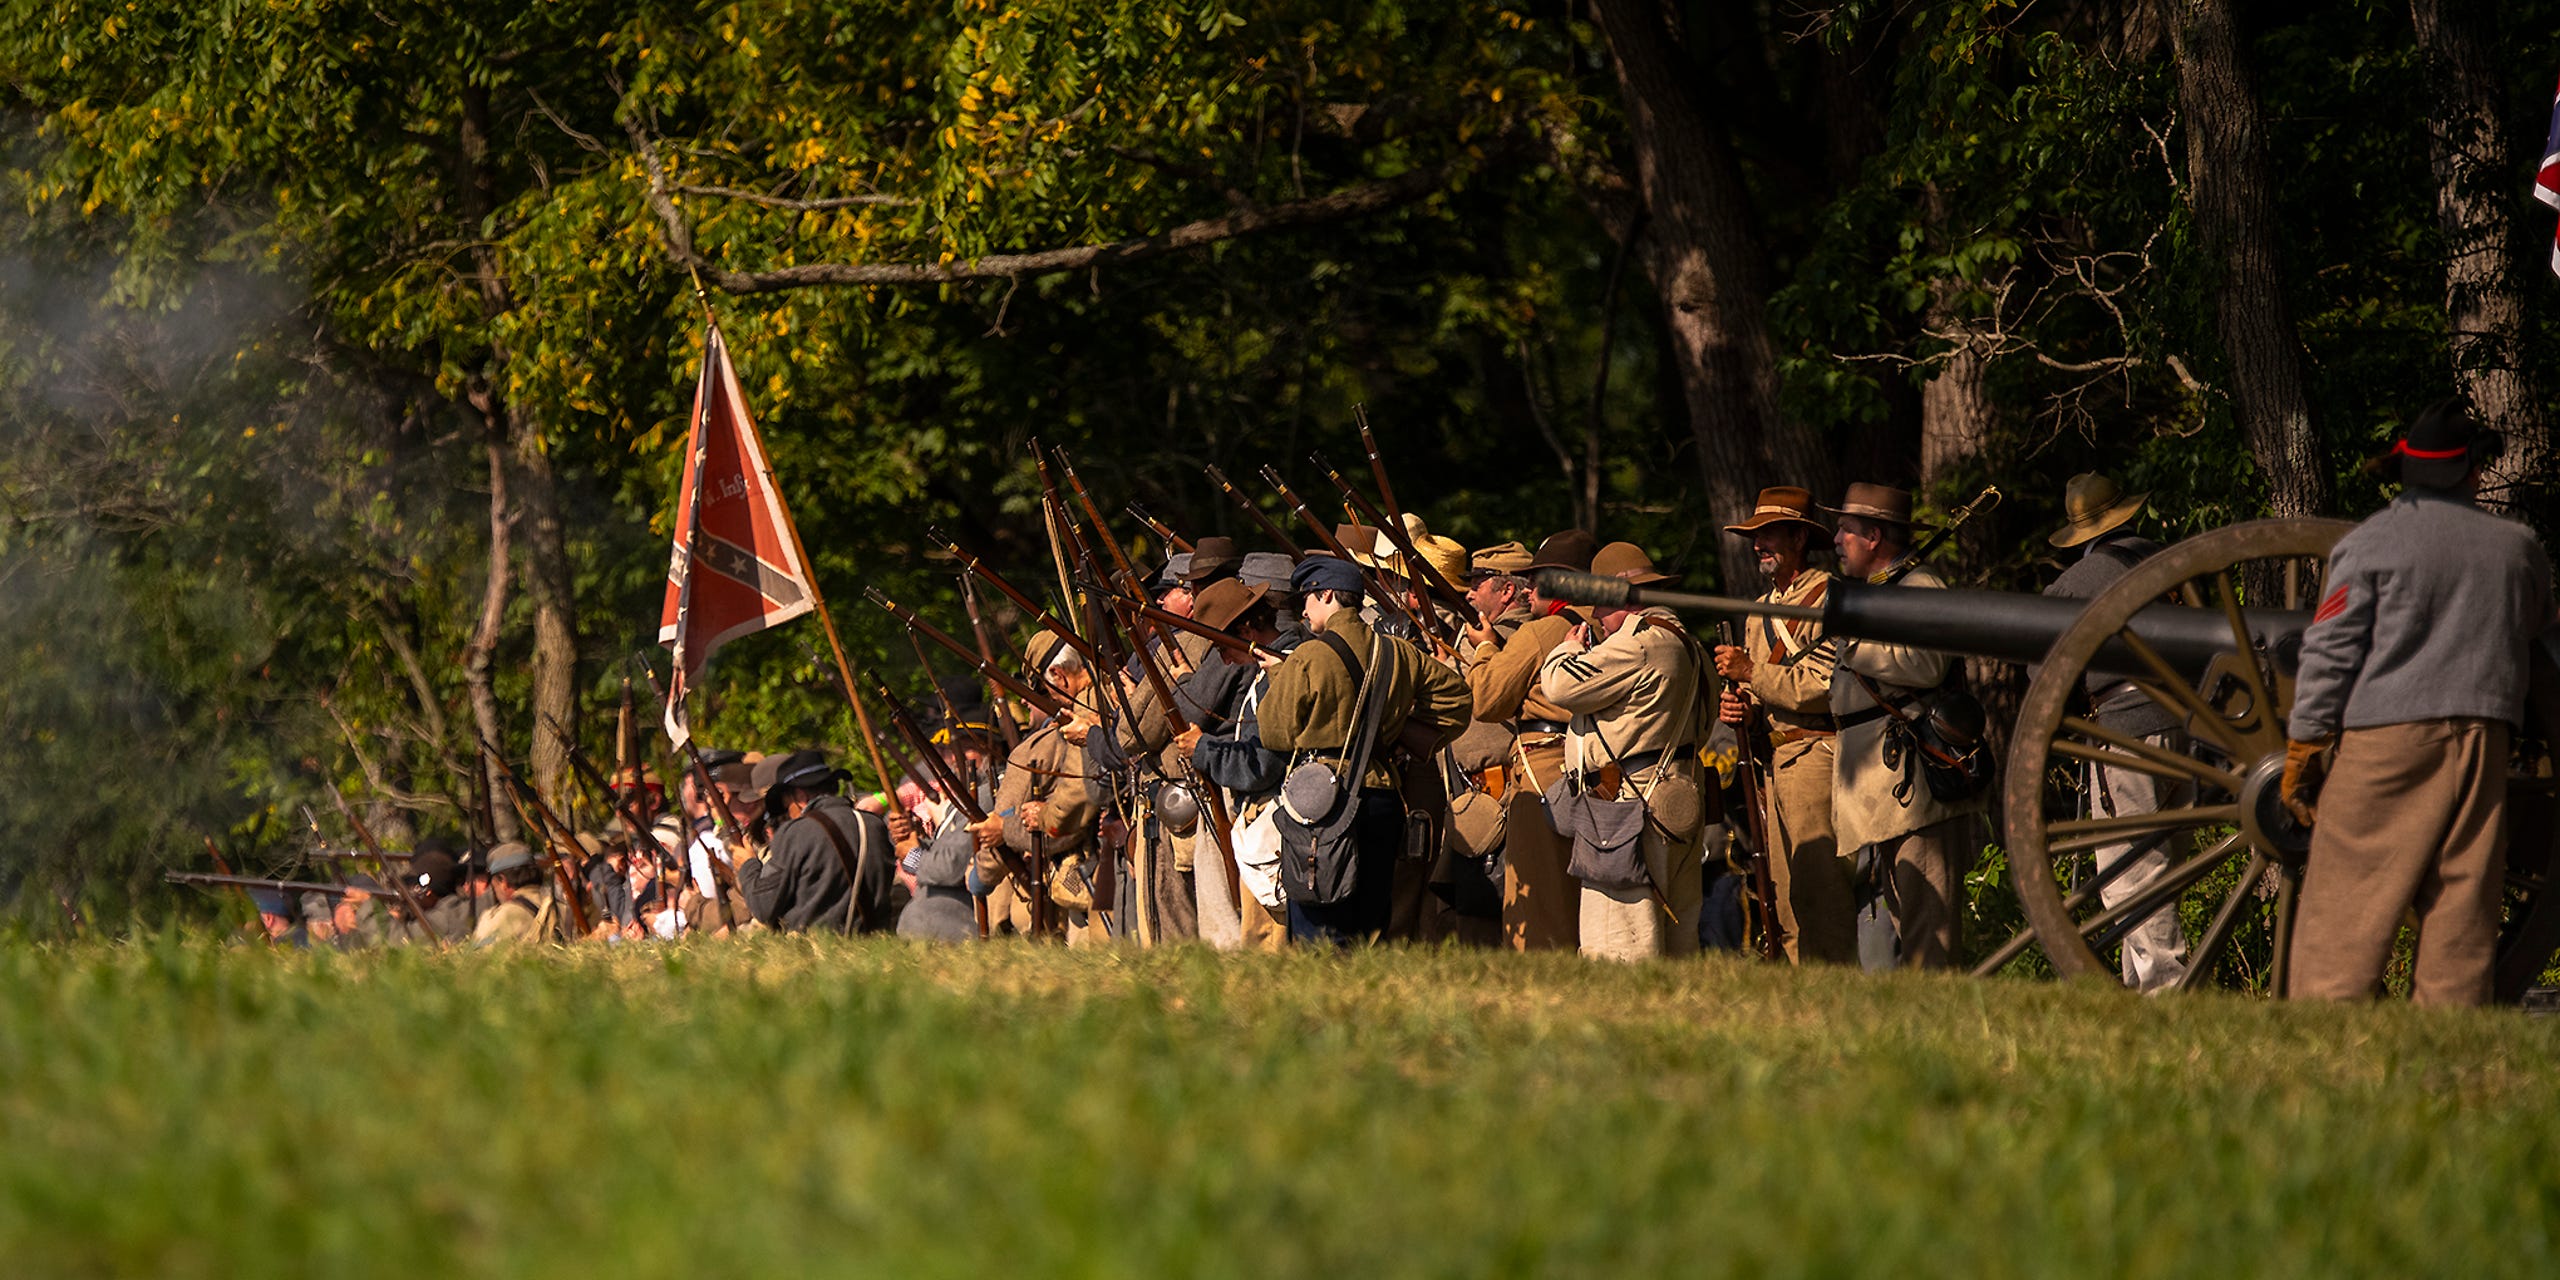 Confederate soldiers lined up